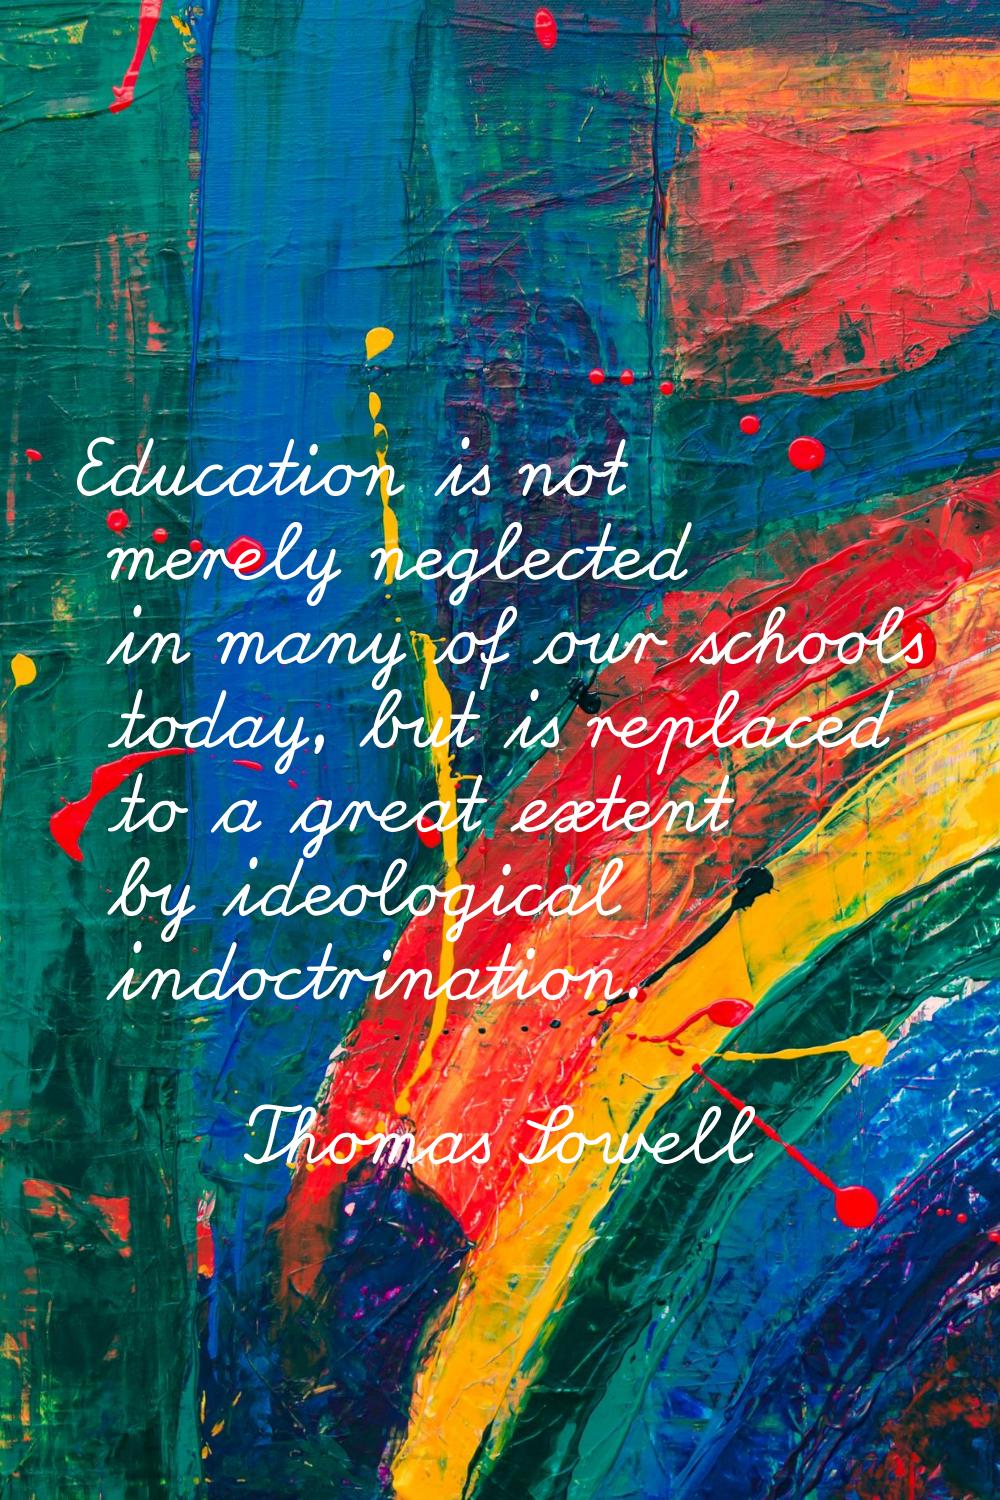 Education is not merely neglected in many of our schools today, but is replaced to a great extent b